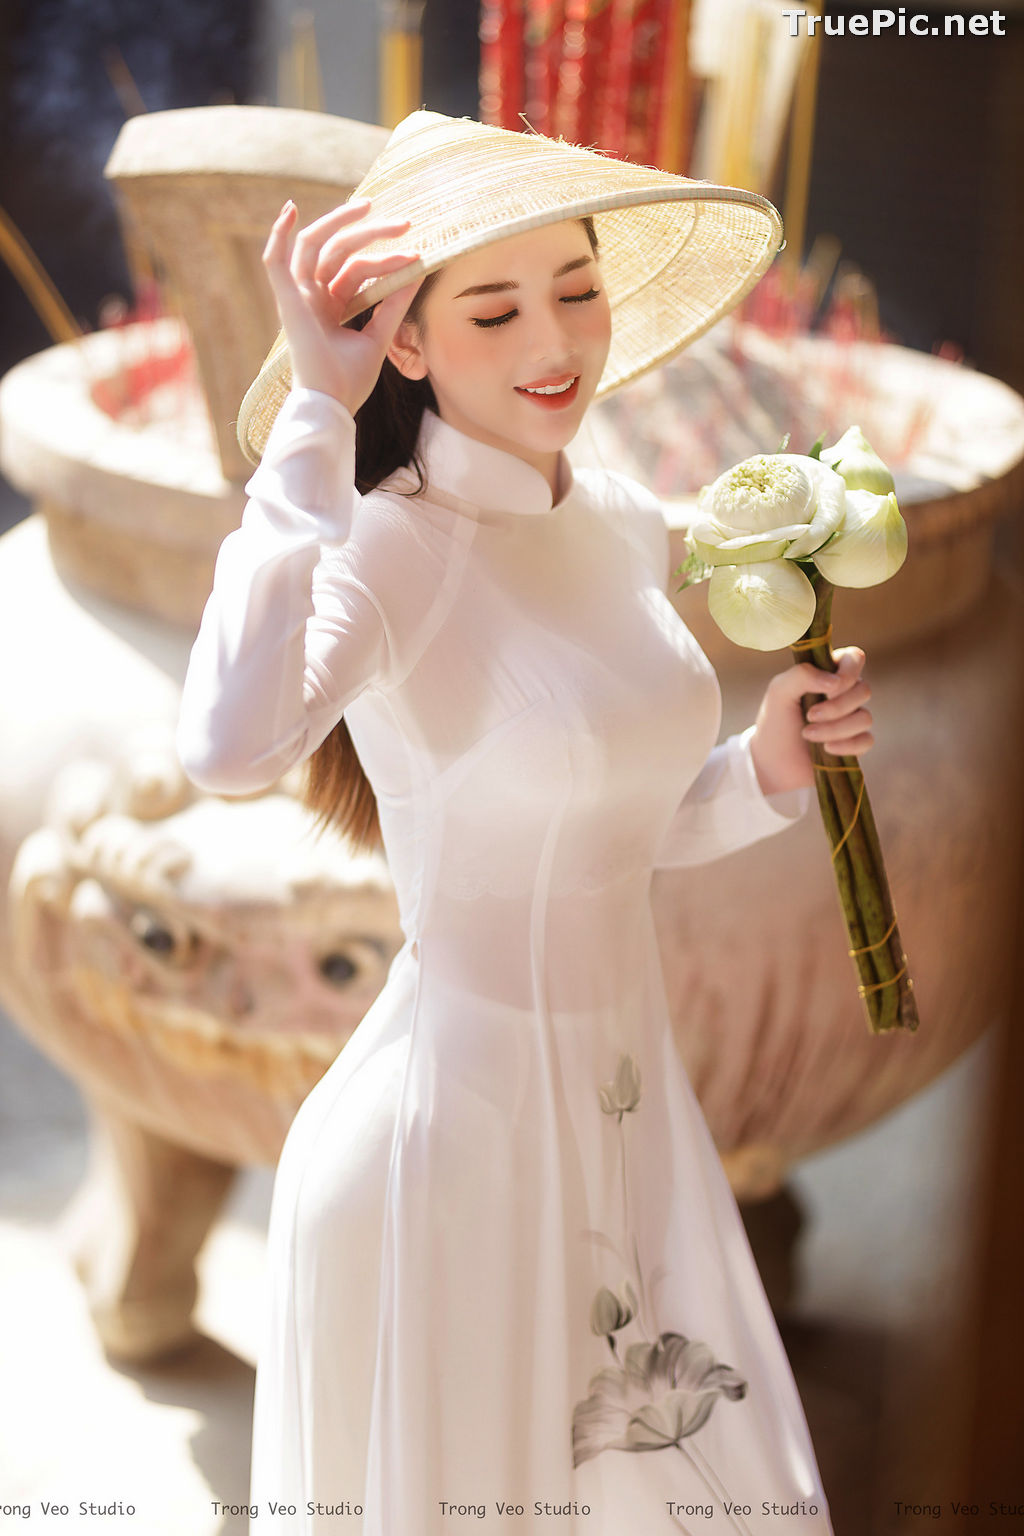 Image The Beauty of Vietnamese Girls with Traditional Dress (Ao Dai) #2 - TruePic.net - Picture-75